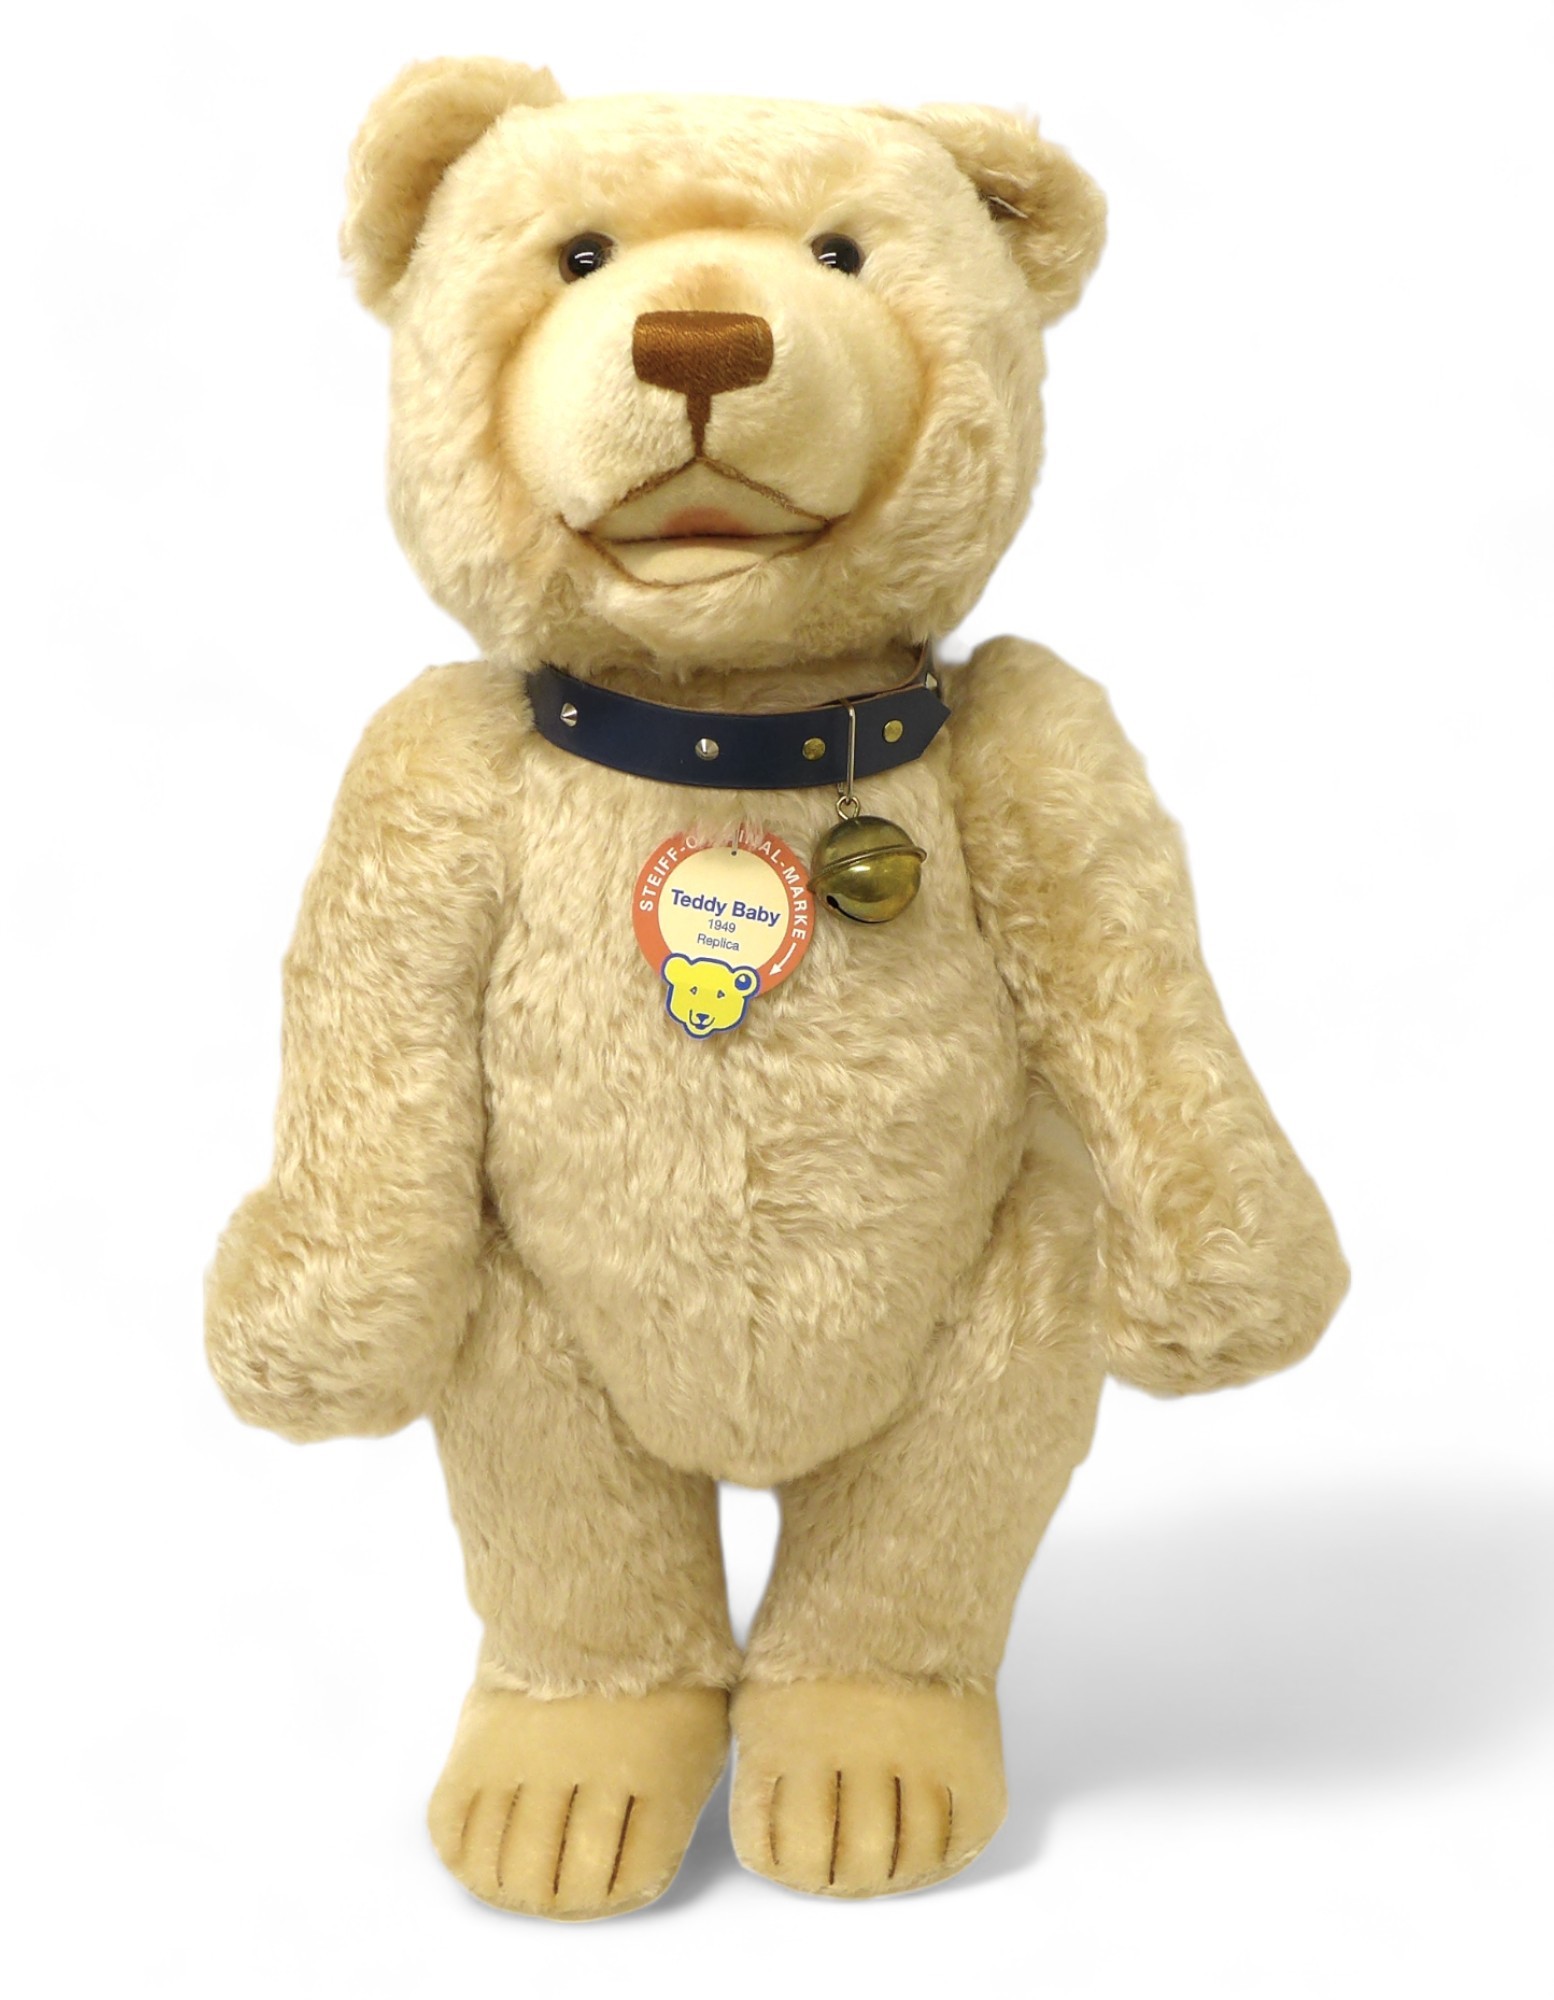 Steiff Teddy Baby 1949 replica, maize mohair posable five jointed bear standing 75cm tall, with open - Image 5 of 12